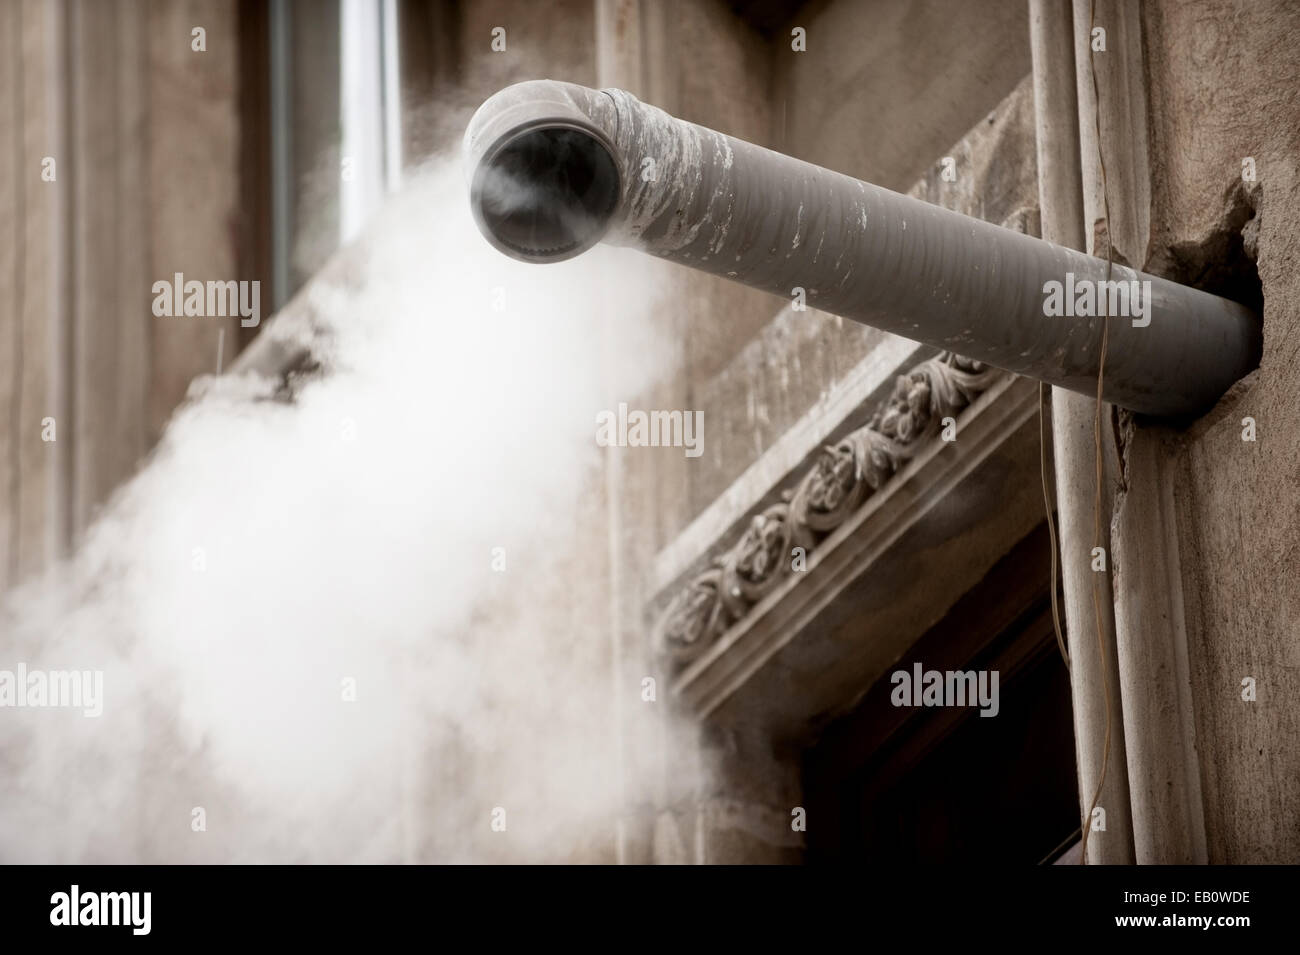 Steam coming out from a home tube pipe Stock Photo